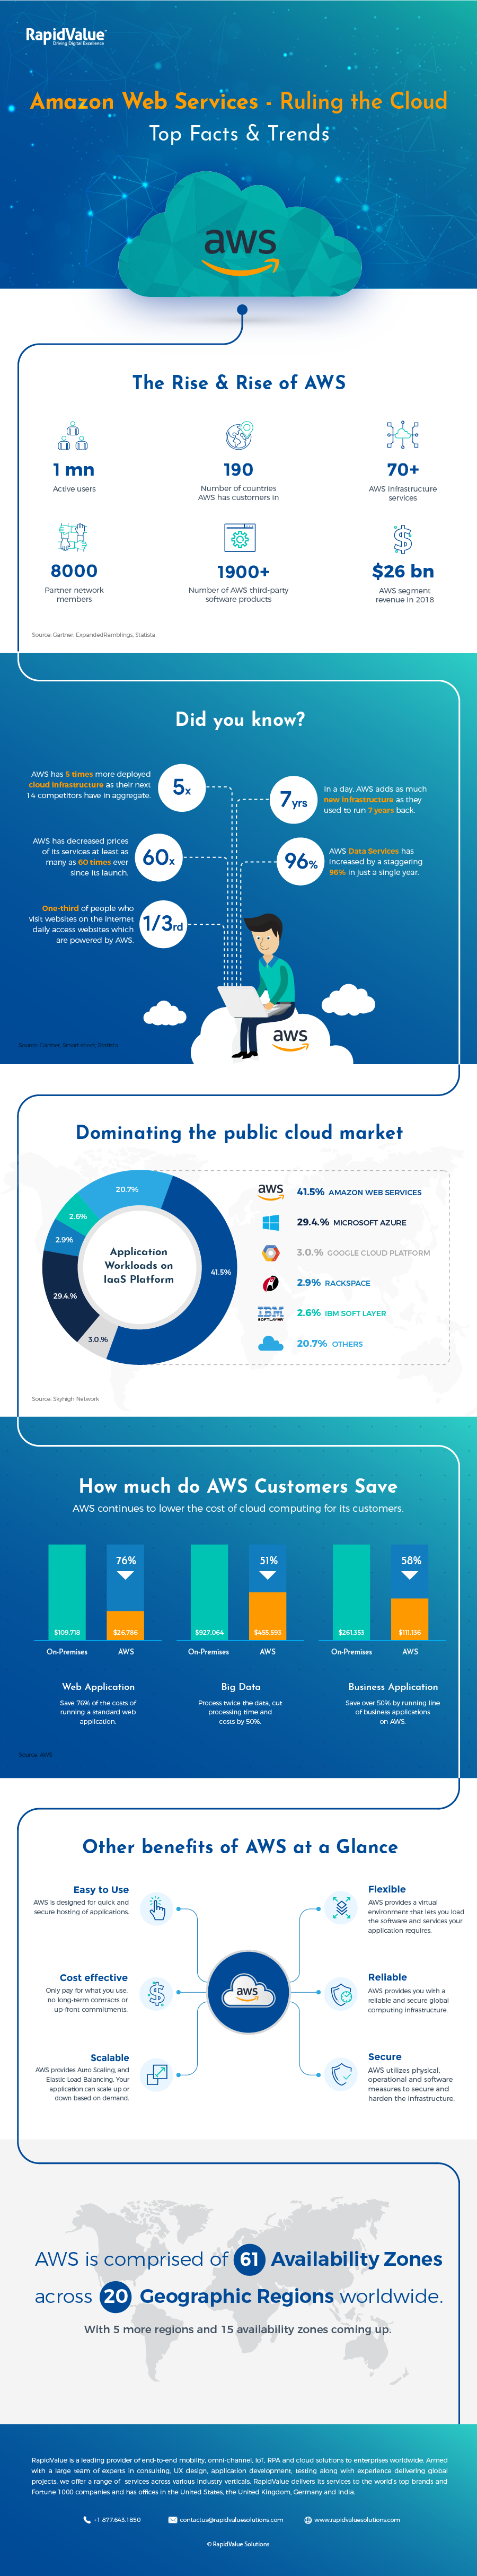 The Impressive Stats Behind Amazon's Dominance of the Cloud